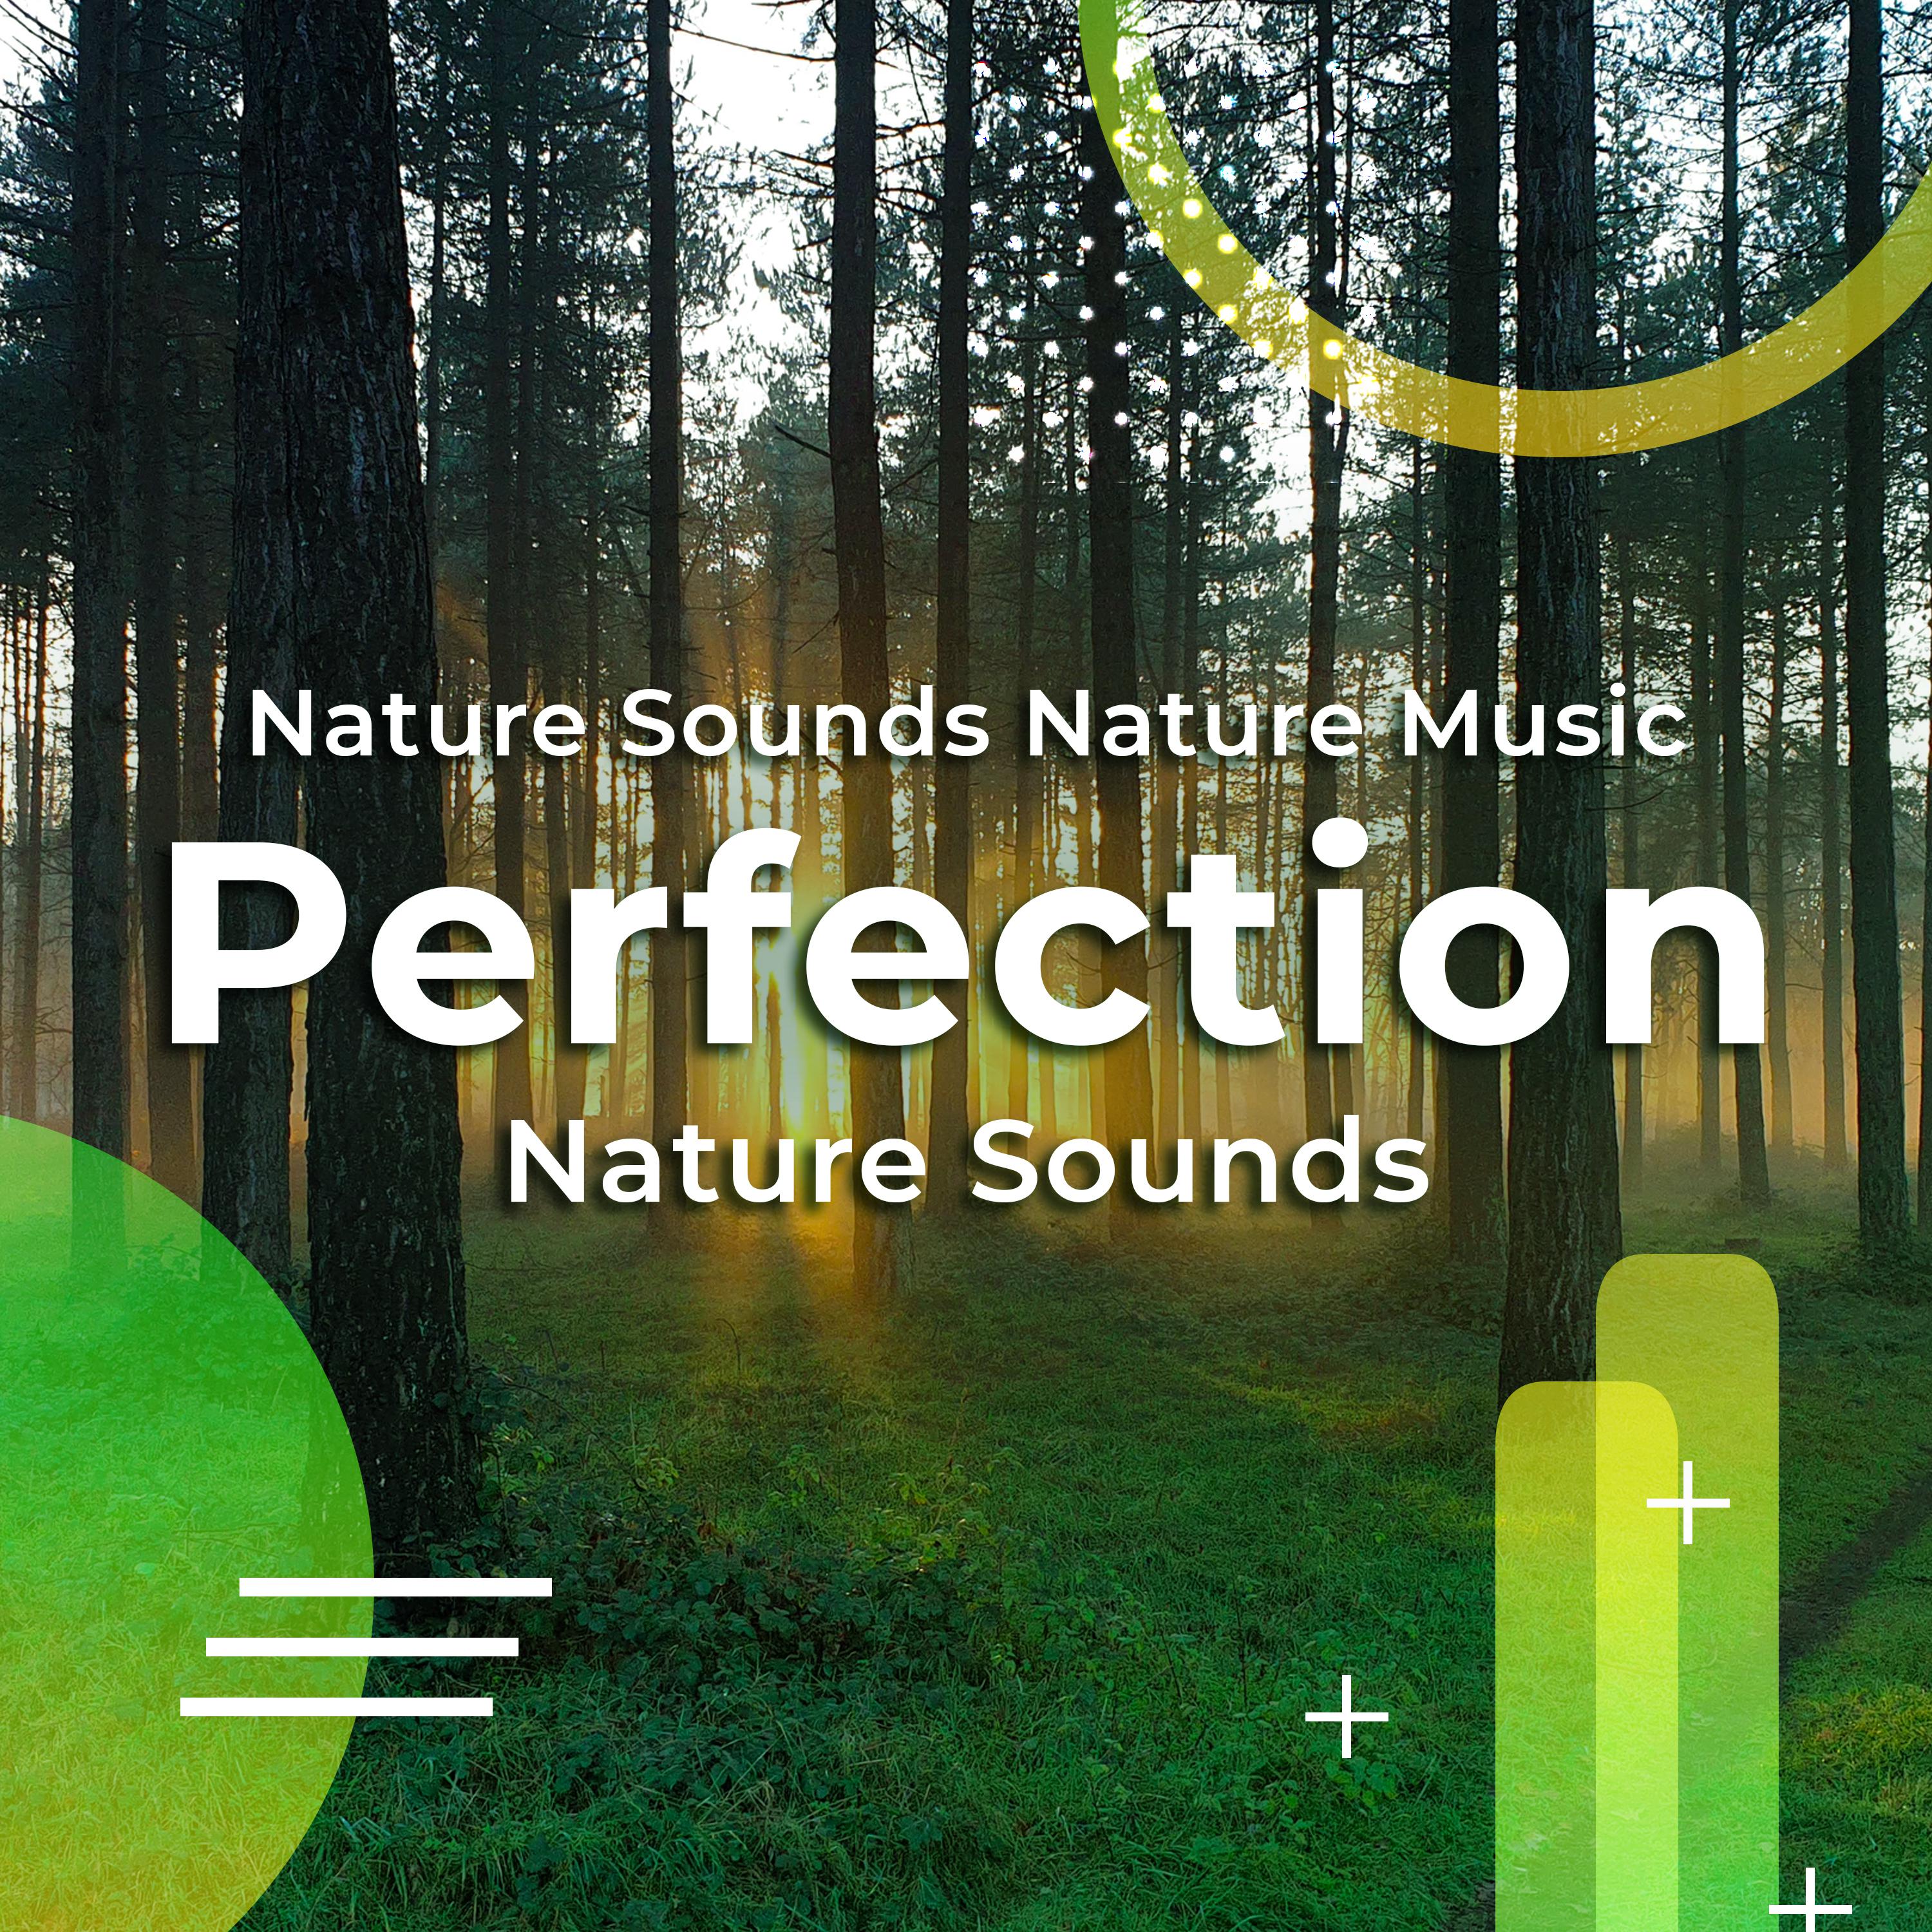 Perfection Nature Sounds